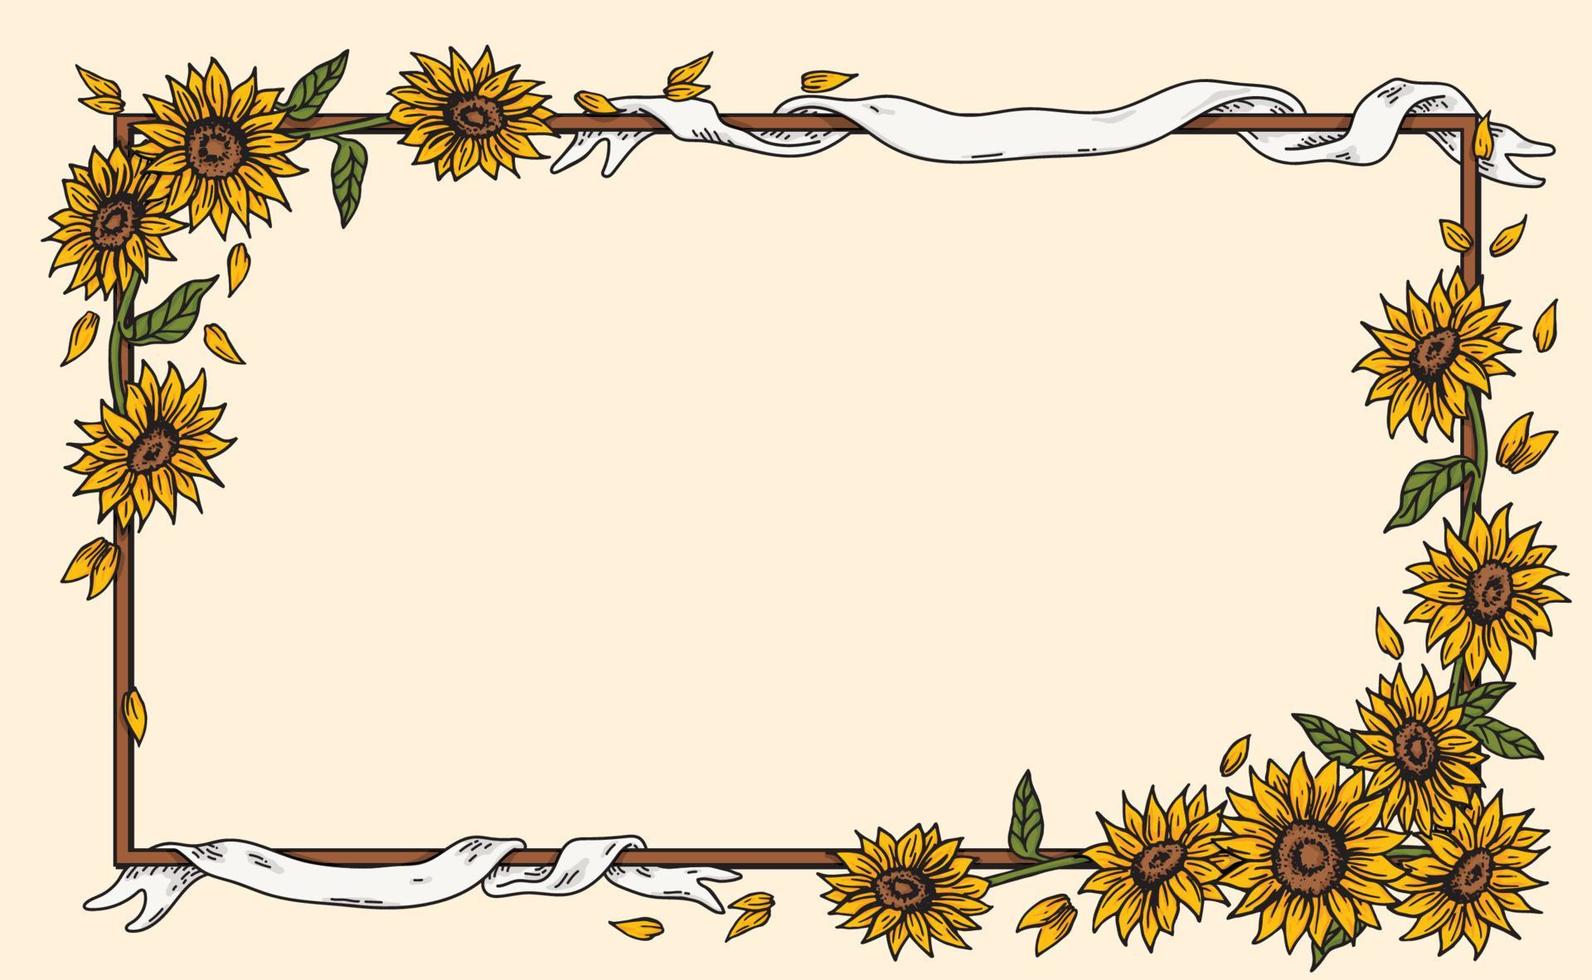 bouquet of sunflowers retro old line art etching vector border frame template